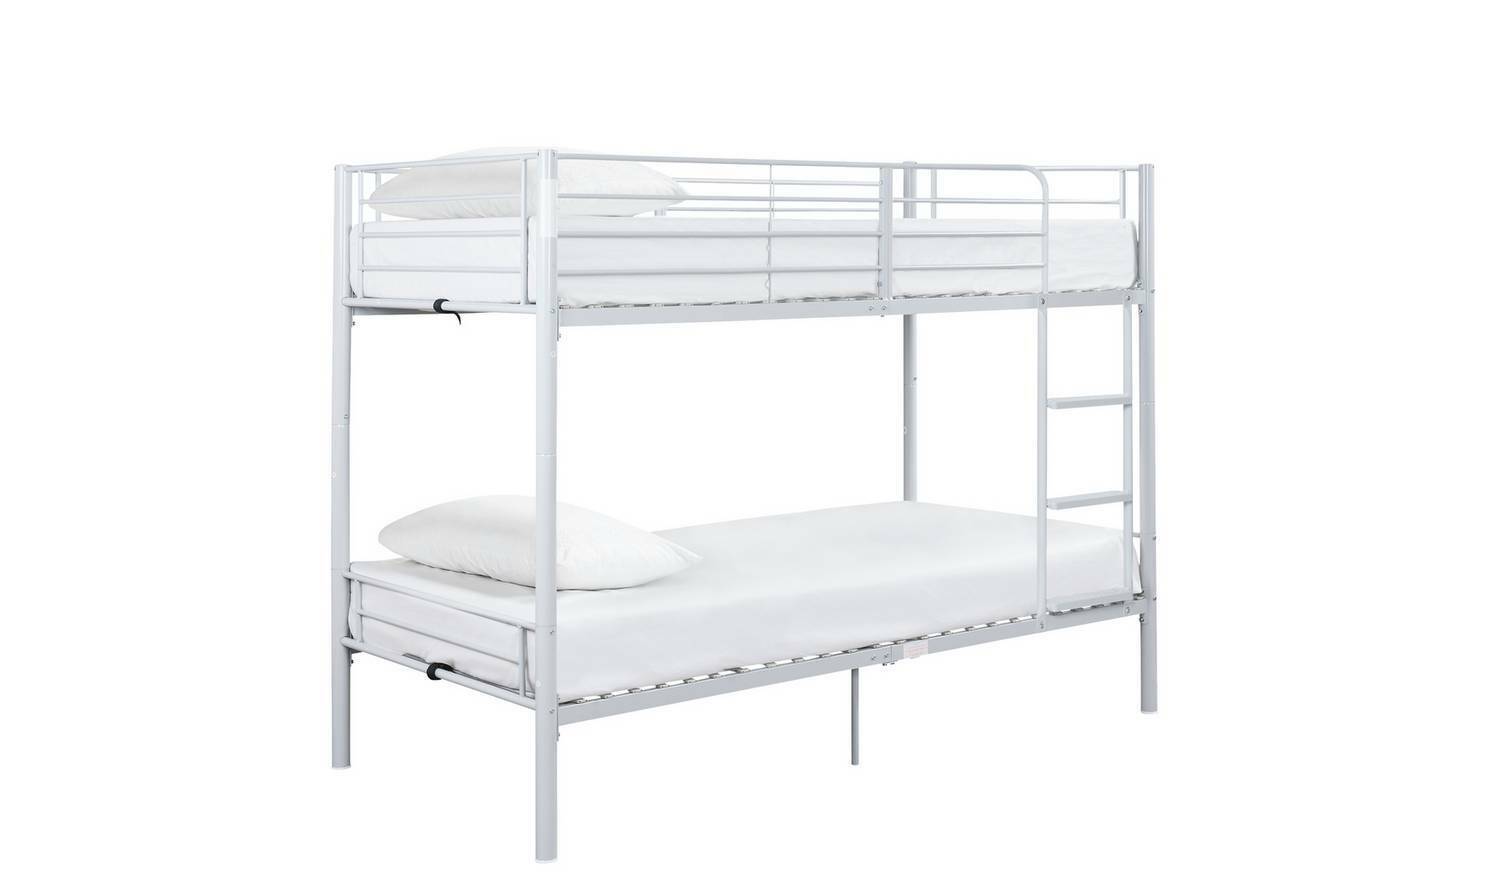 Metal Bunk Beds For In Nigeria, Metal Bunk Beds With Mattresses Included